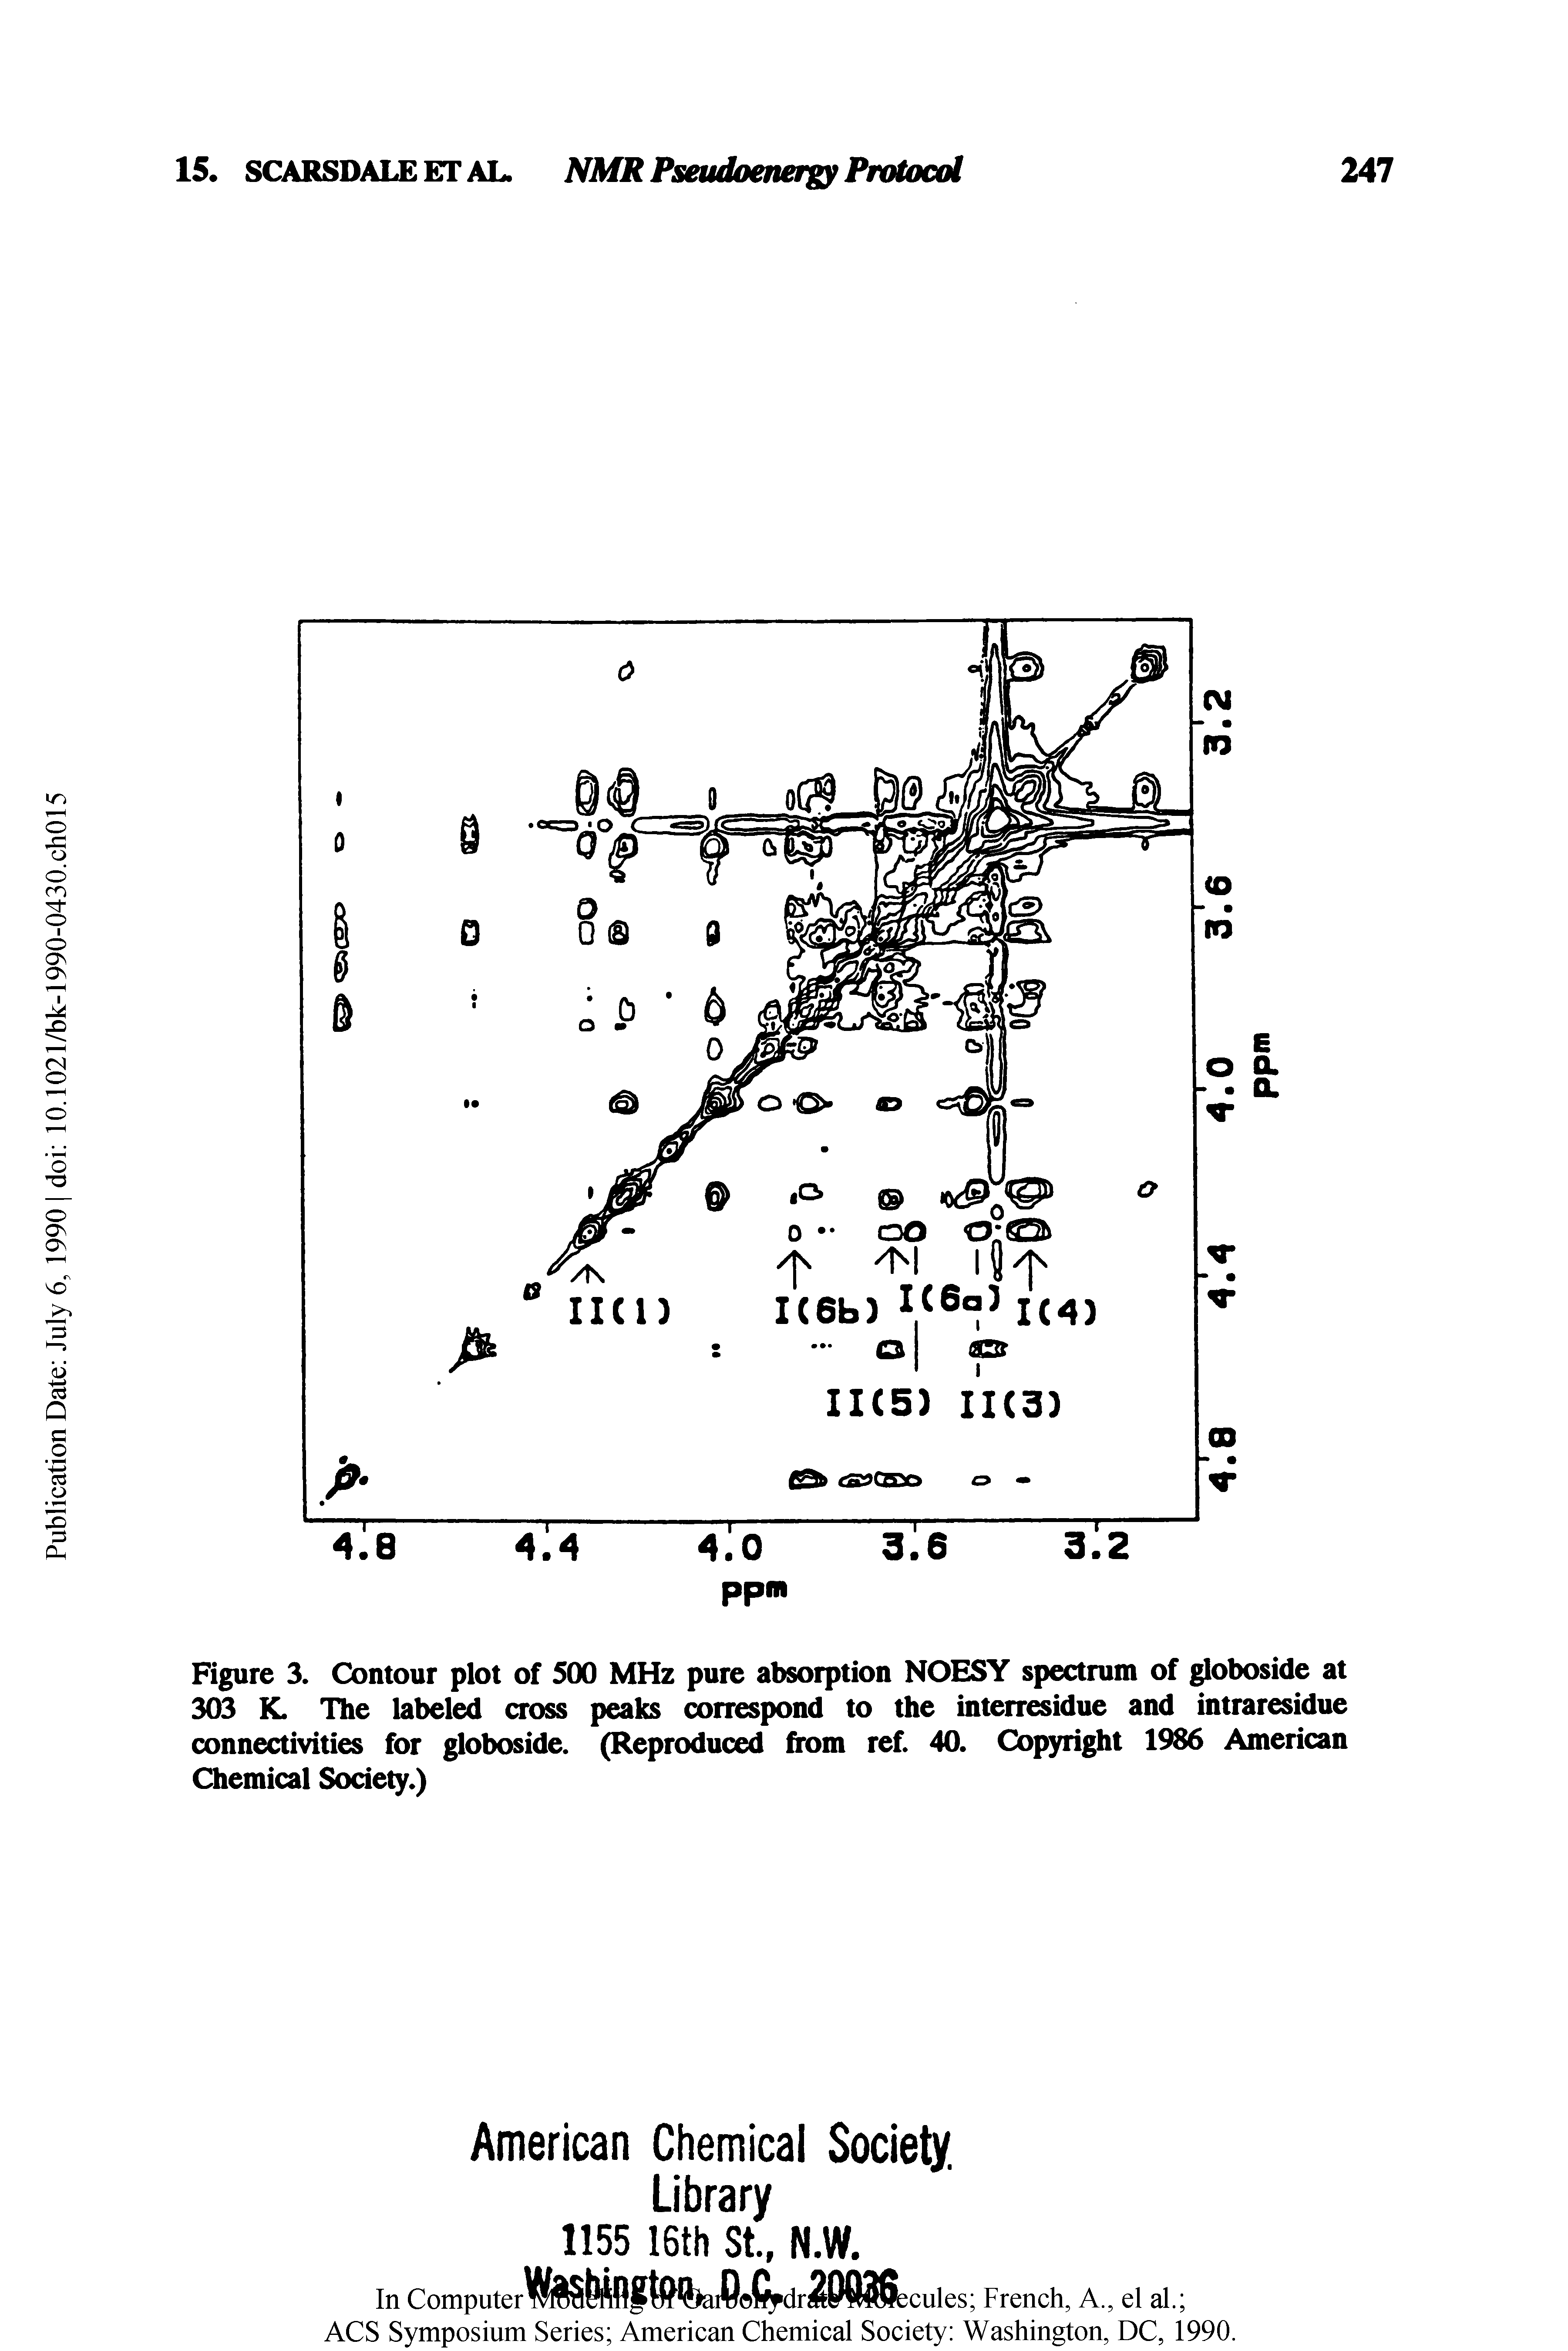 Figure 3. Contour plot of 500 MHz pure absorption NOESY spectrum of globoside at 303 K. The labeled cross peaks correspond to the interresidue and intraresidue connectivities for globoside. (Reproduced from ref. 40. Copyright 1986 American Chemical Society.)...